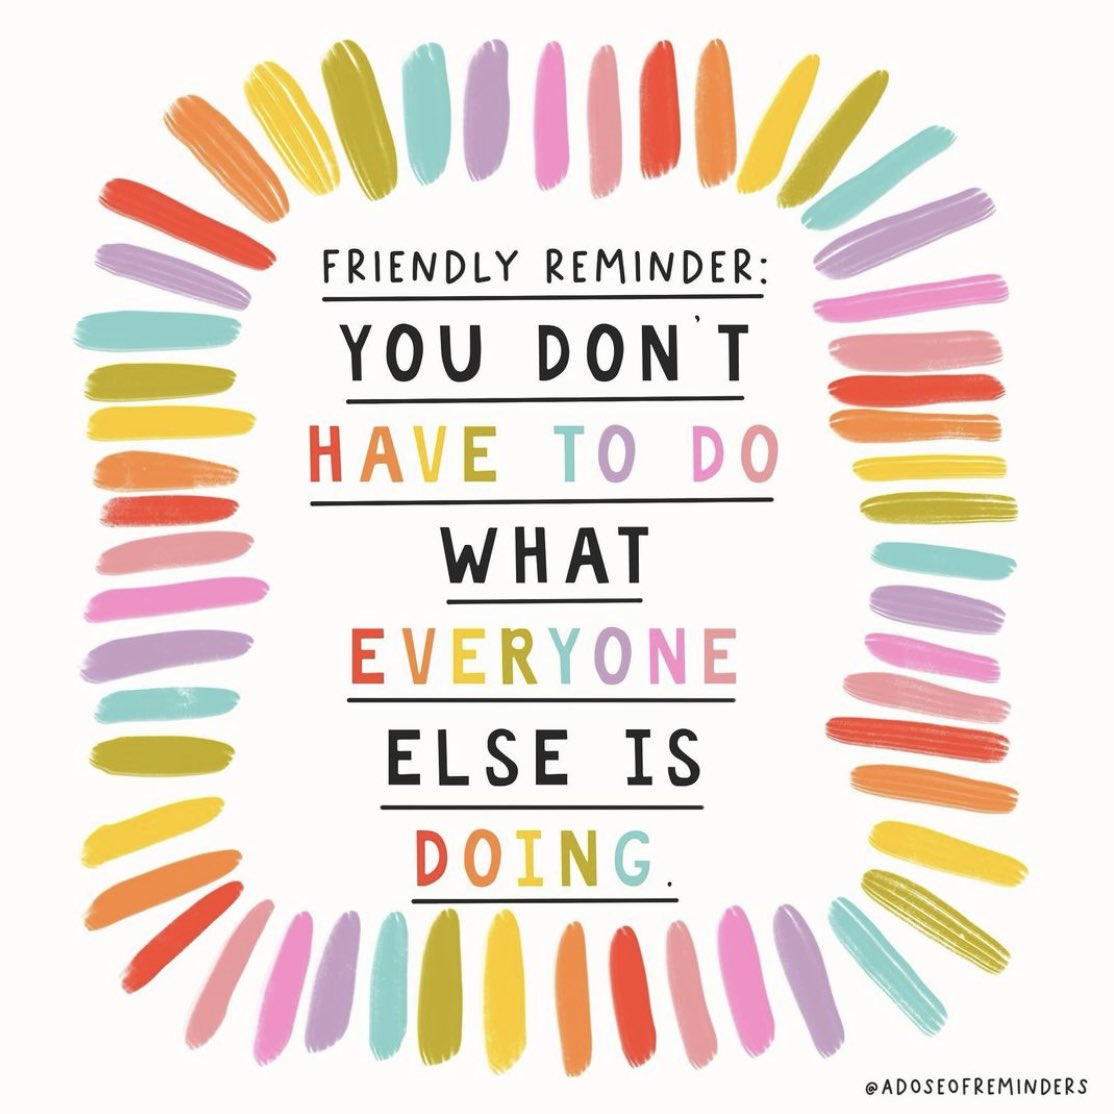 Friendly reminder: you don’t have to do what everyone else is doing Image: instagram.com/adoseofreminde…